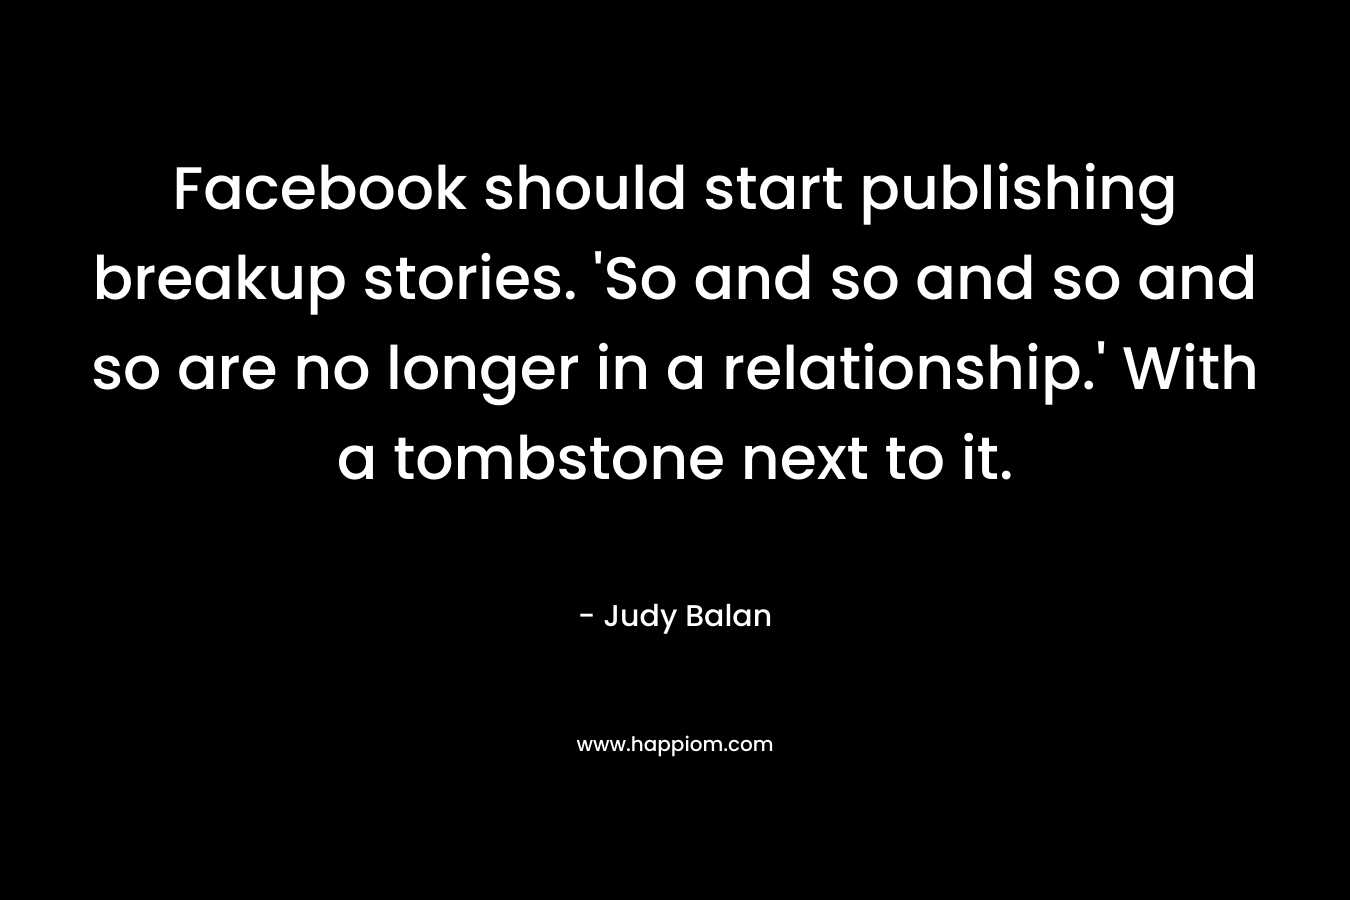 Facebook should start publishing breakup stories. 'So and so and so and so are no longer in a relationship.' With a tombstone next to it.